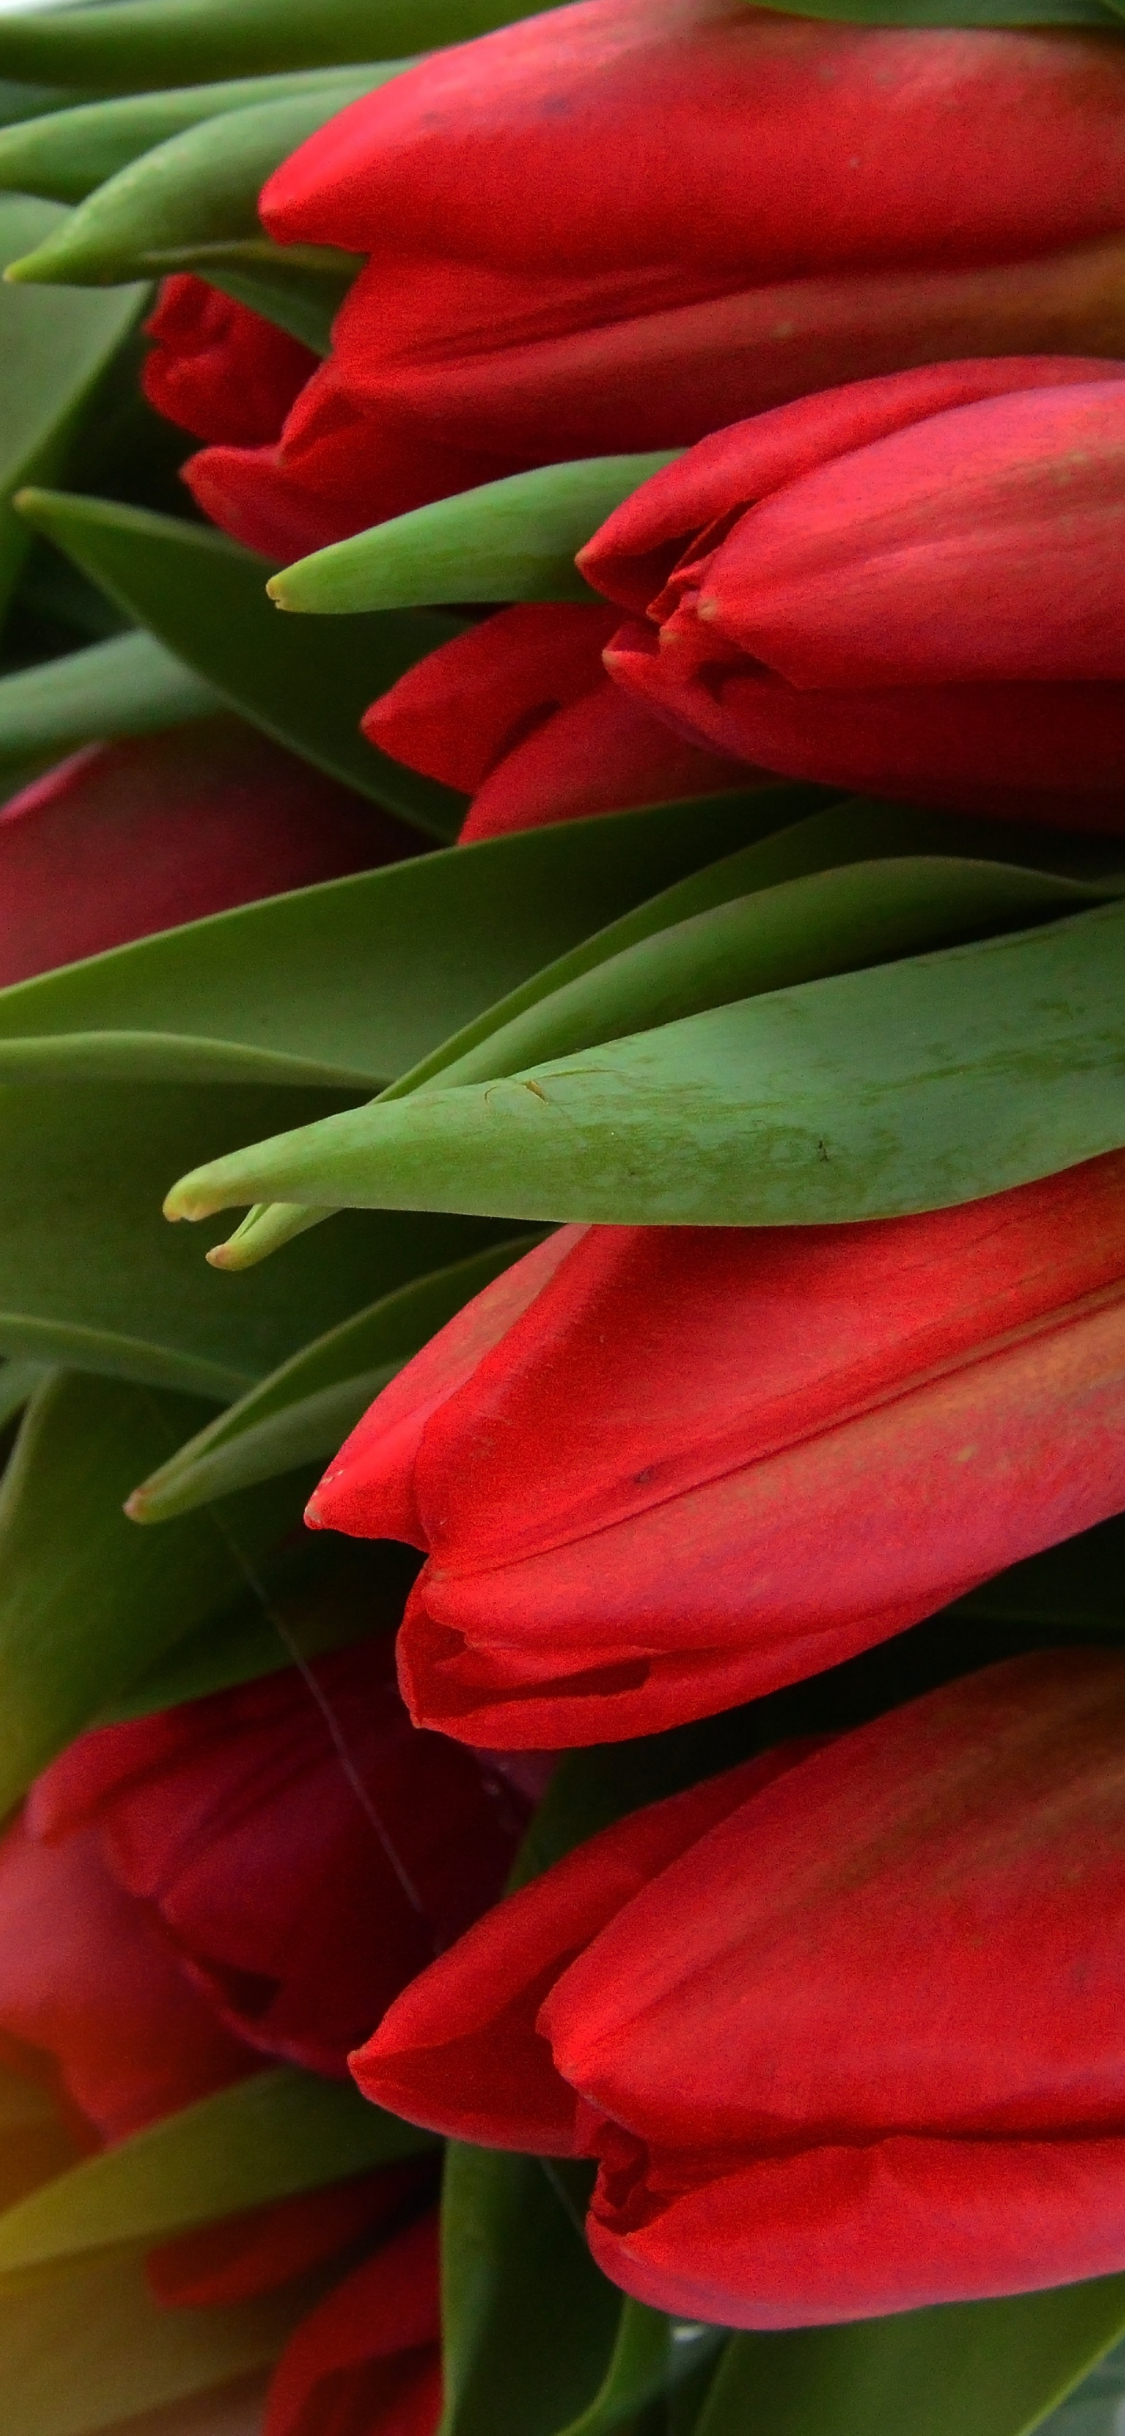 Download wallpaper 1125x2436 red tulip, flowers, fresh, iphone x, 1125x2436  hd background, 3893